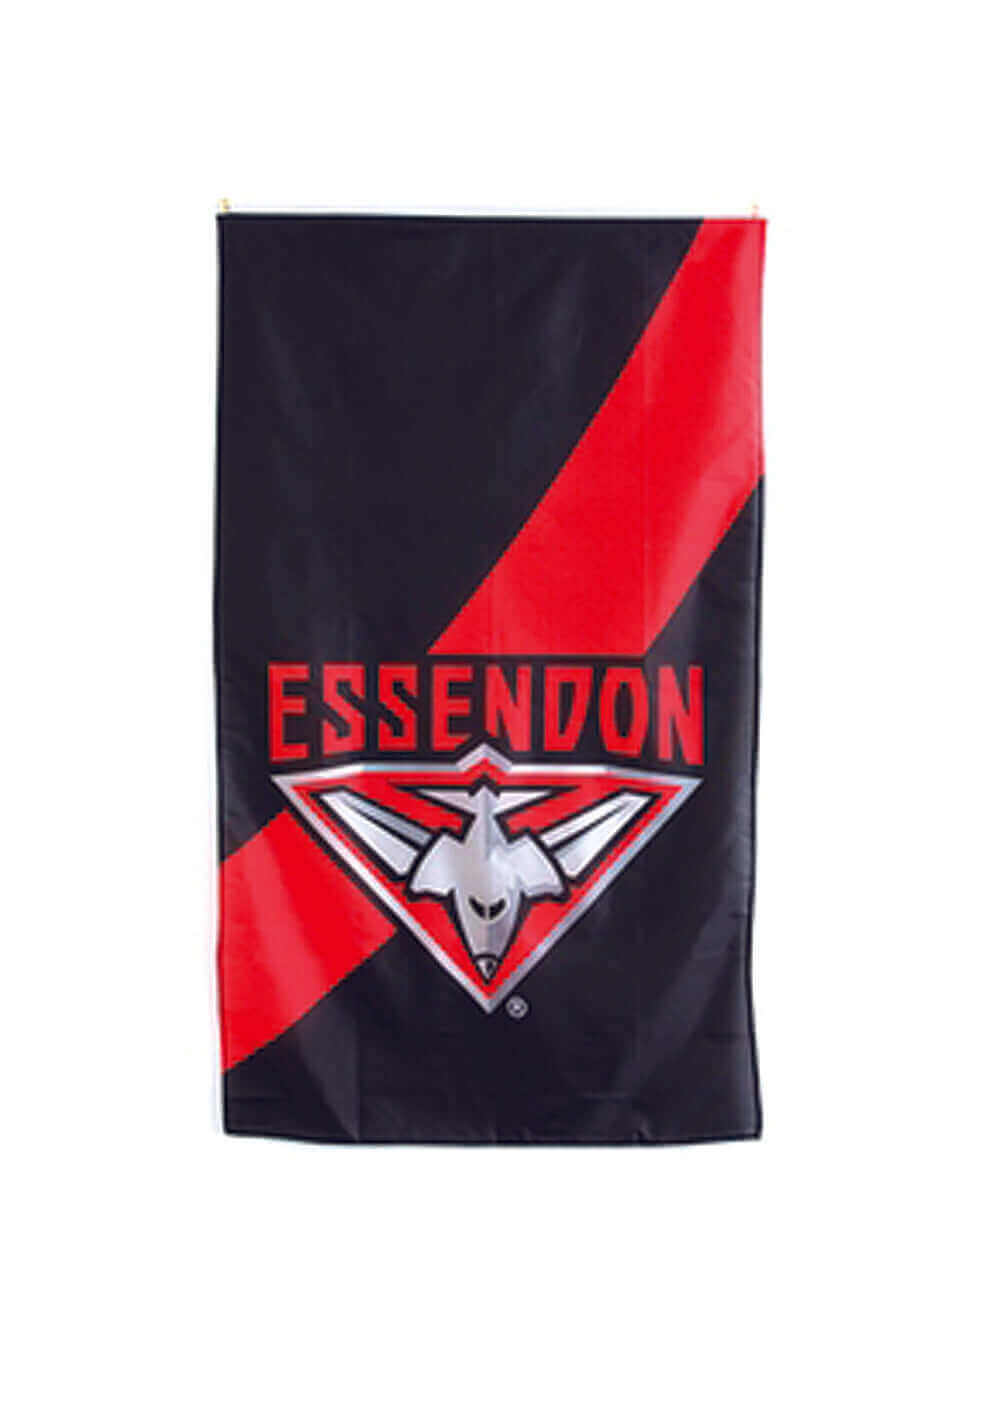 ESSENDON BOMBERS AFL SUPPORTER FLAG_ESSENDON BOMBERS_STUBBY CLUB